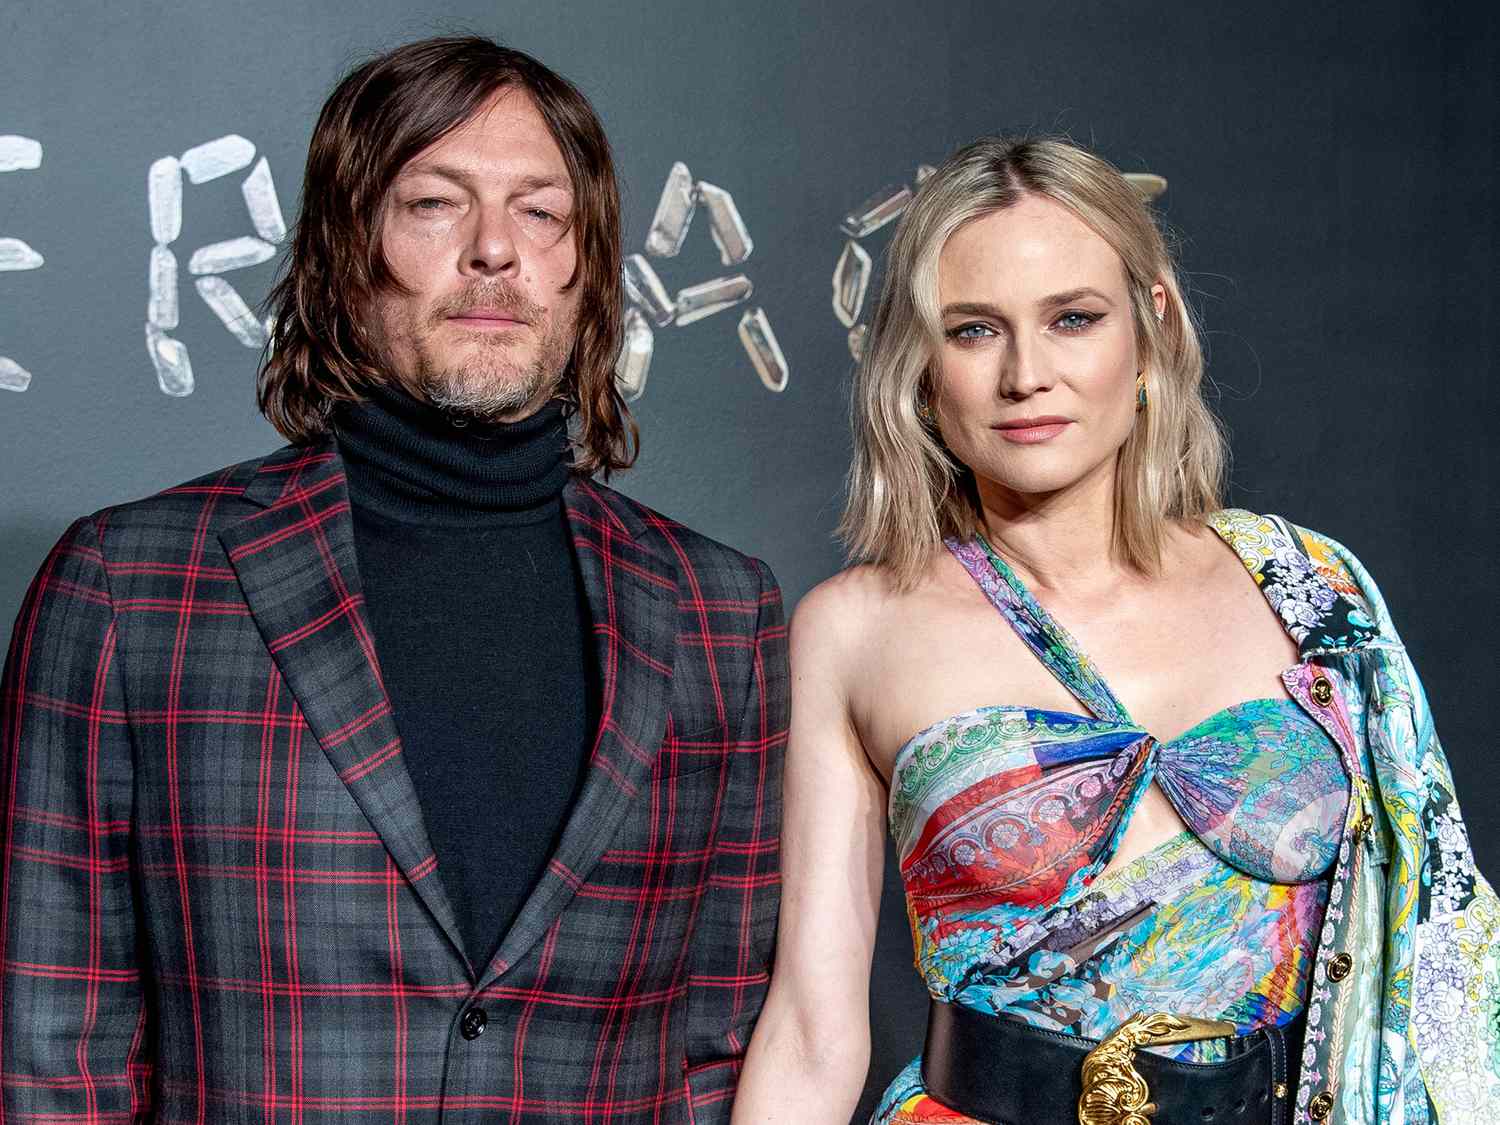 Norman Reedus and Diane Kruger attend the the Versace fall 2019 fashion show at the American Stock Exchange Building in lower Manhattan on December 02, 2018 in New York City